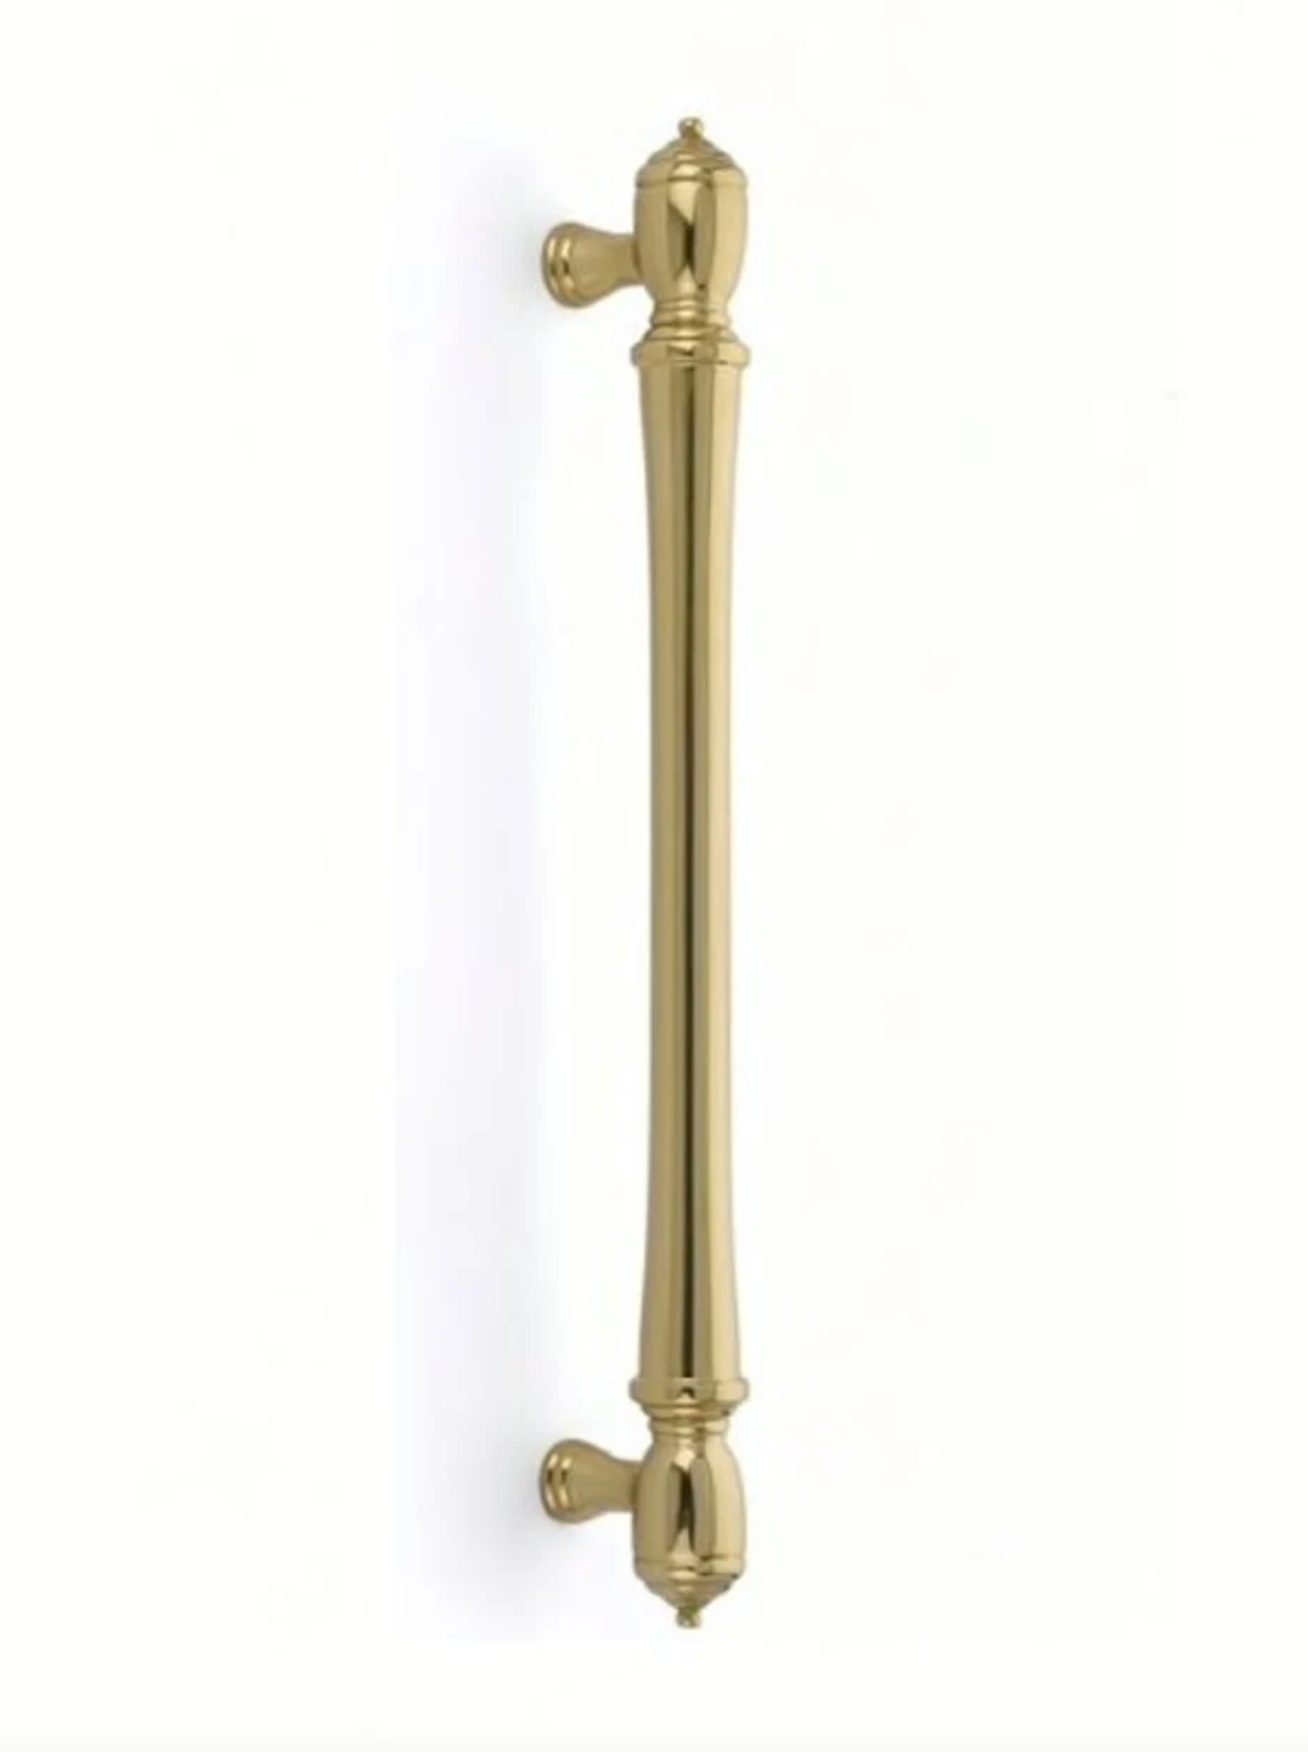 Unlacquered Polished Brass "Heritage" Appliance Pull- Kitchen Appliance Handles